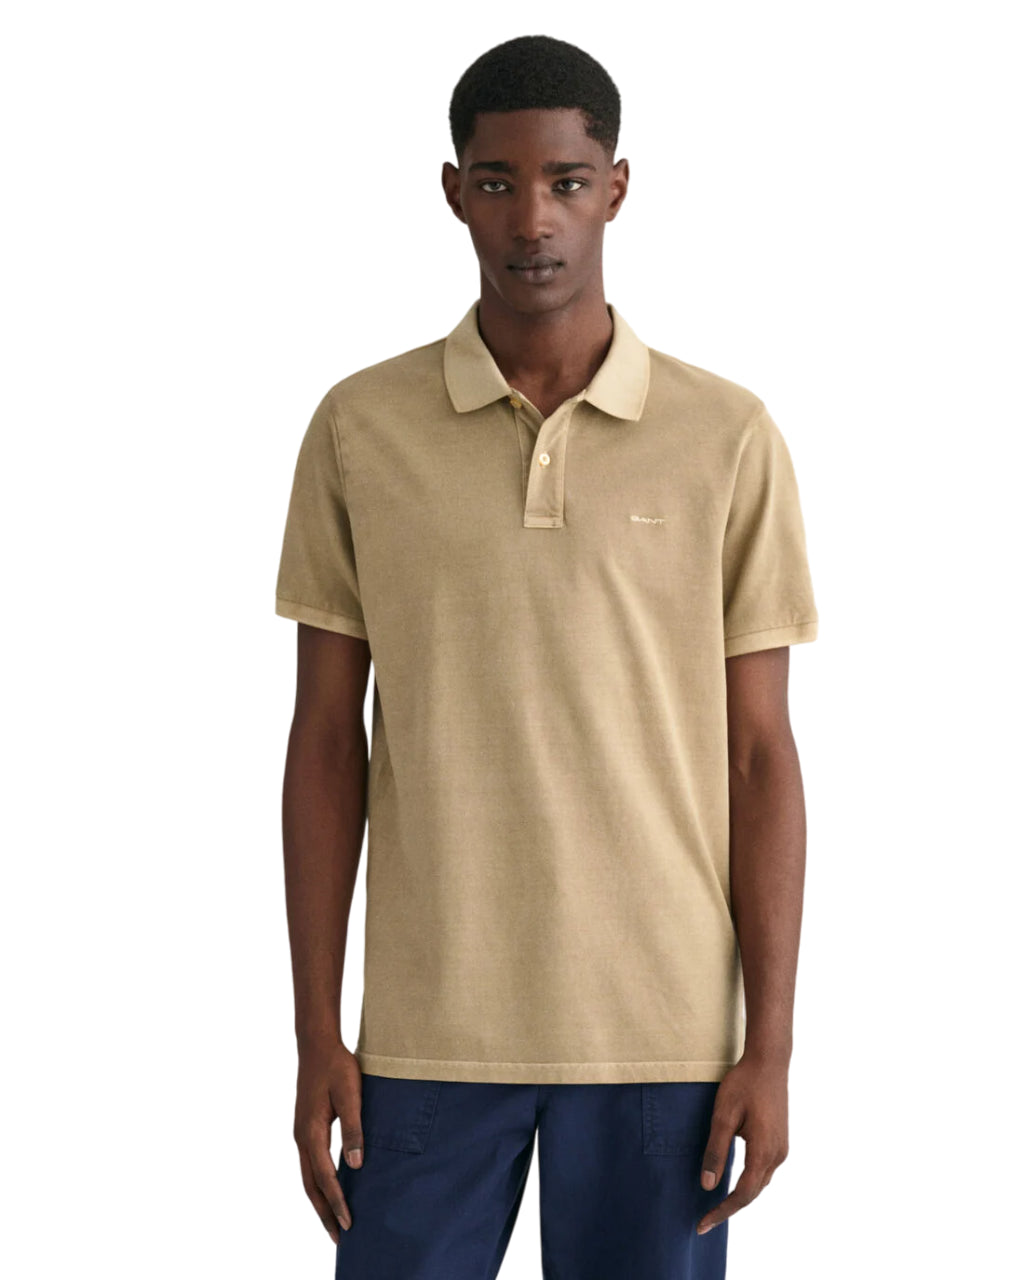 GANT POLO SUNFADED IN PIQUE REGULAR FIT DRIED KHAKI